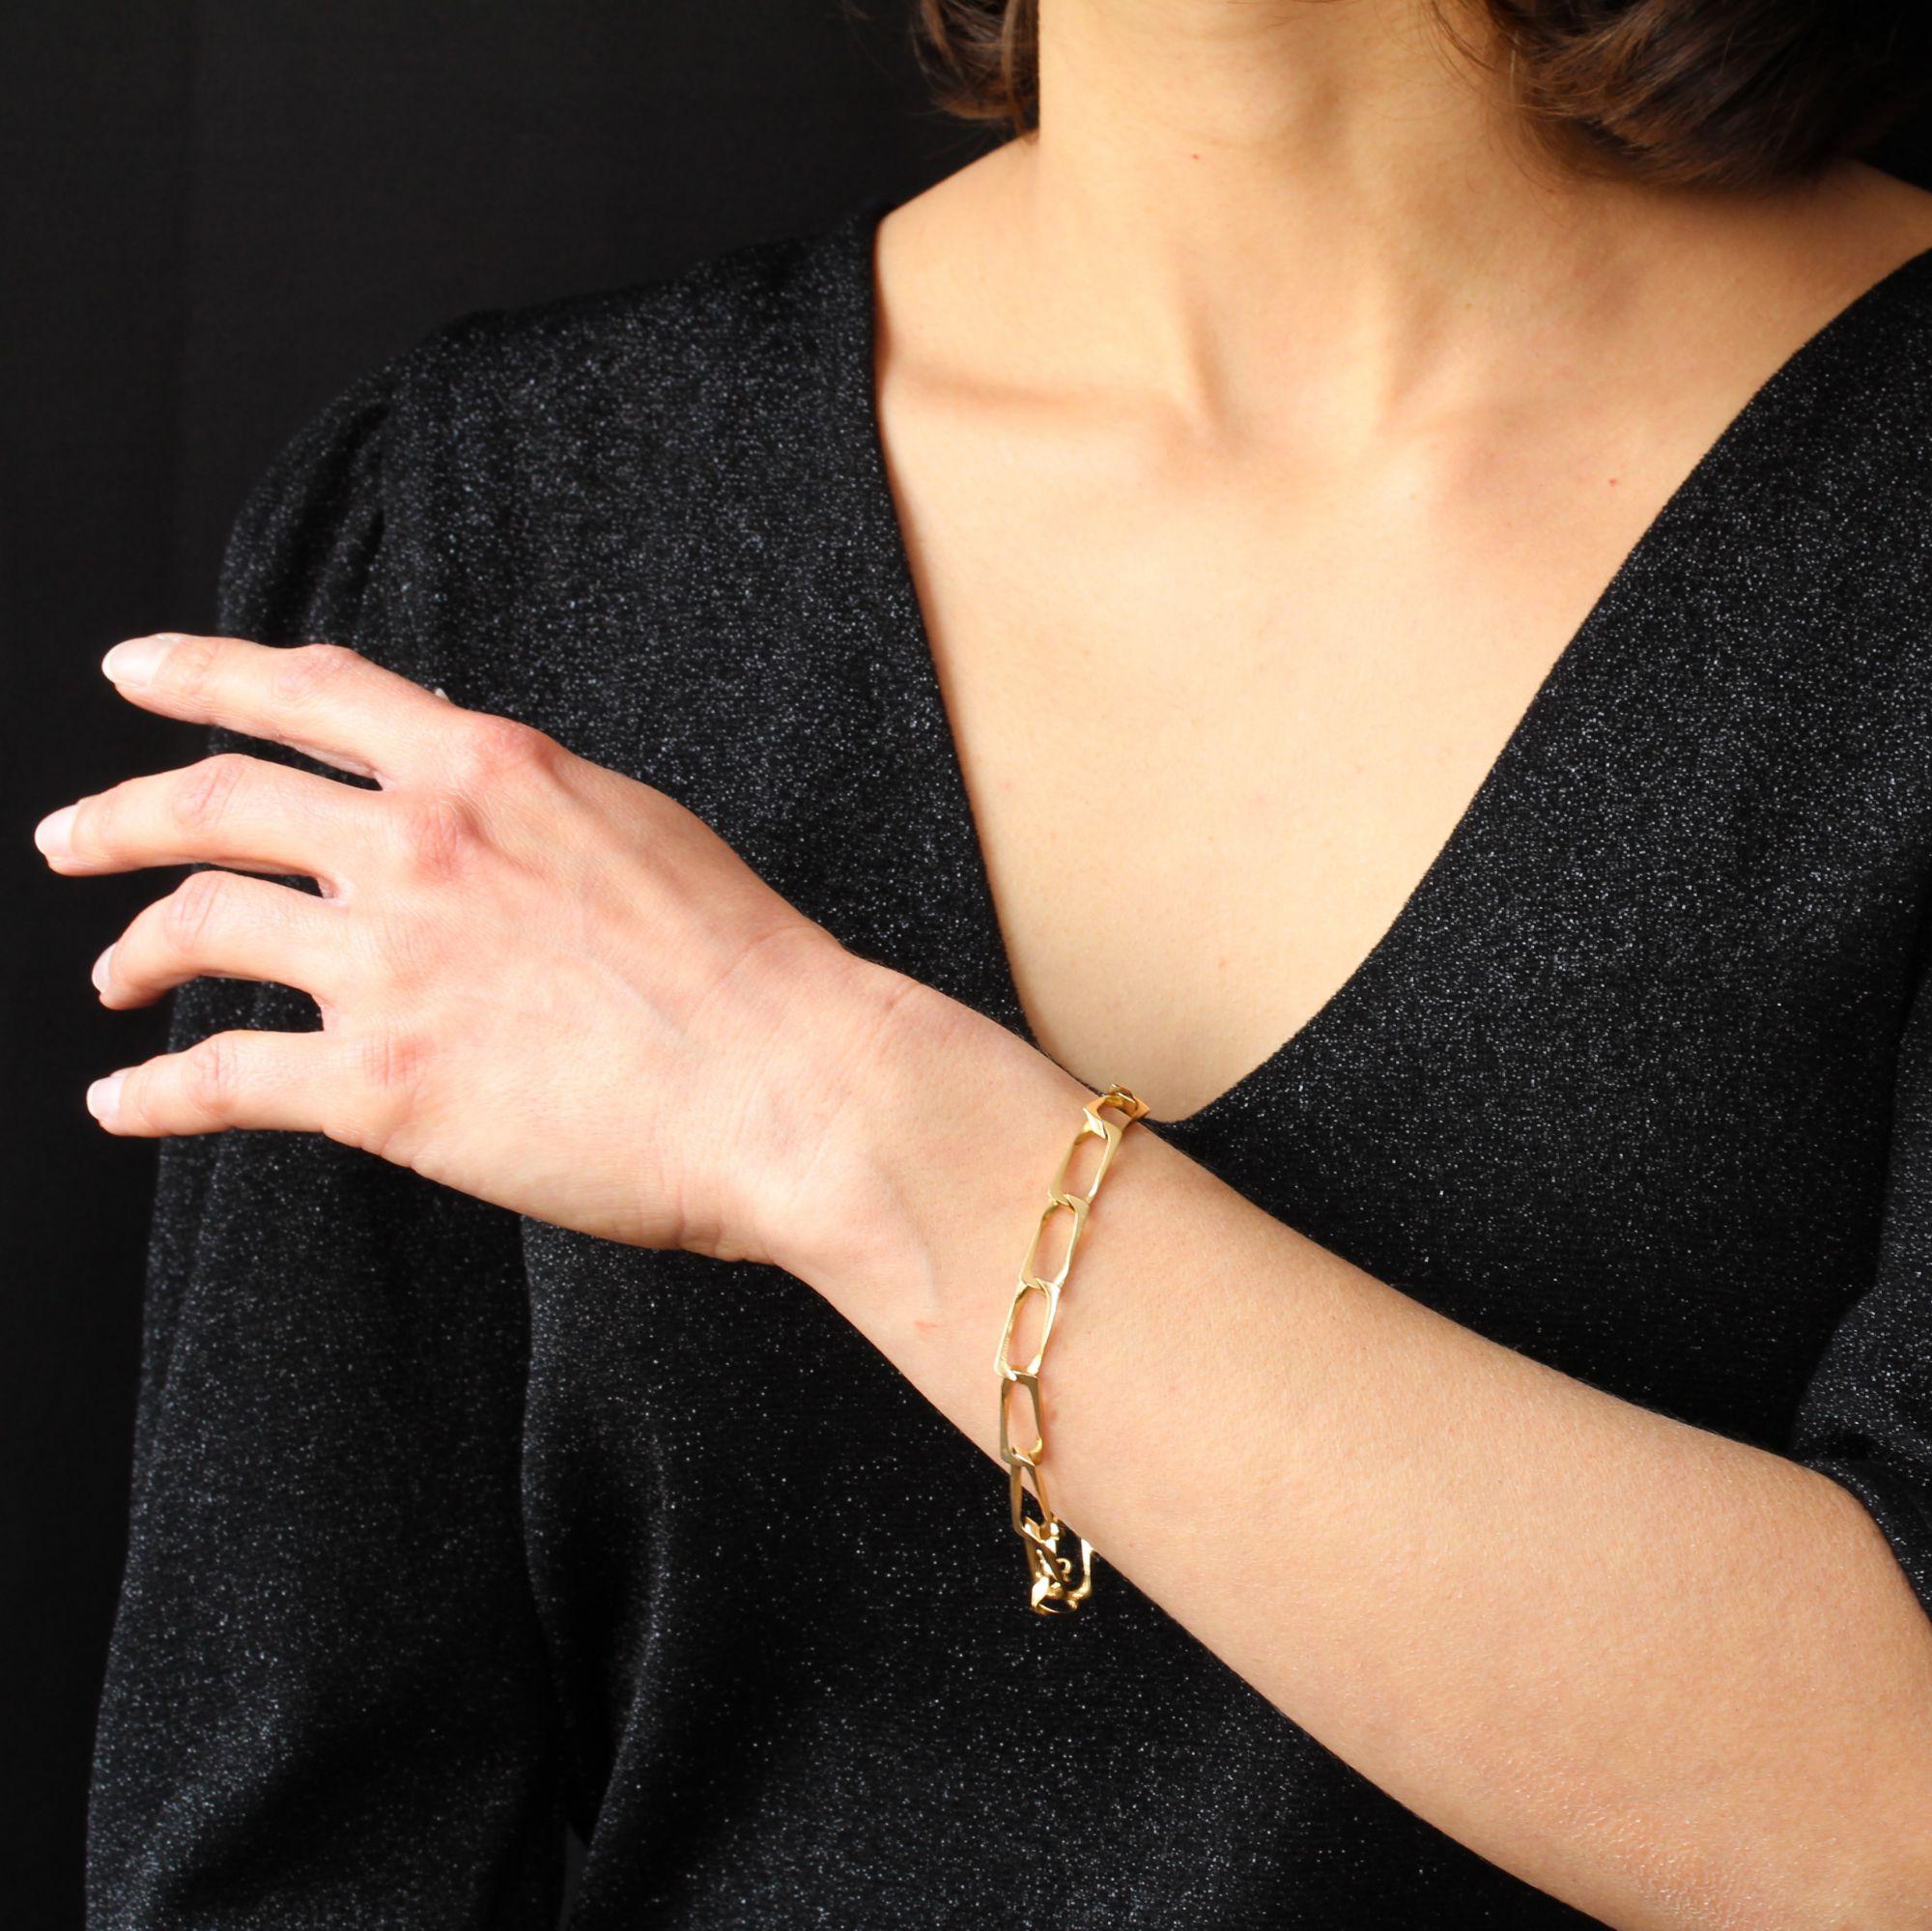 Bracelet in 18 karat yellow gold.
This second- hand curb bracelet is composed of rectangular links. The clasp has a hinge with safety 